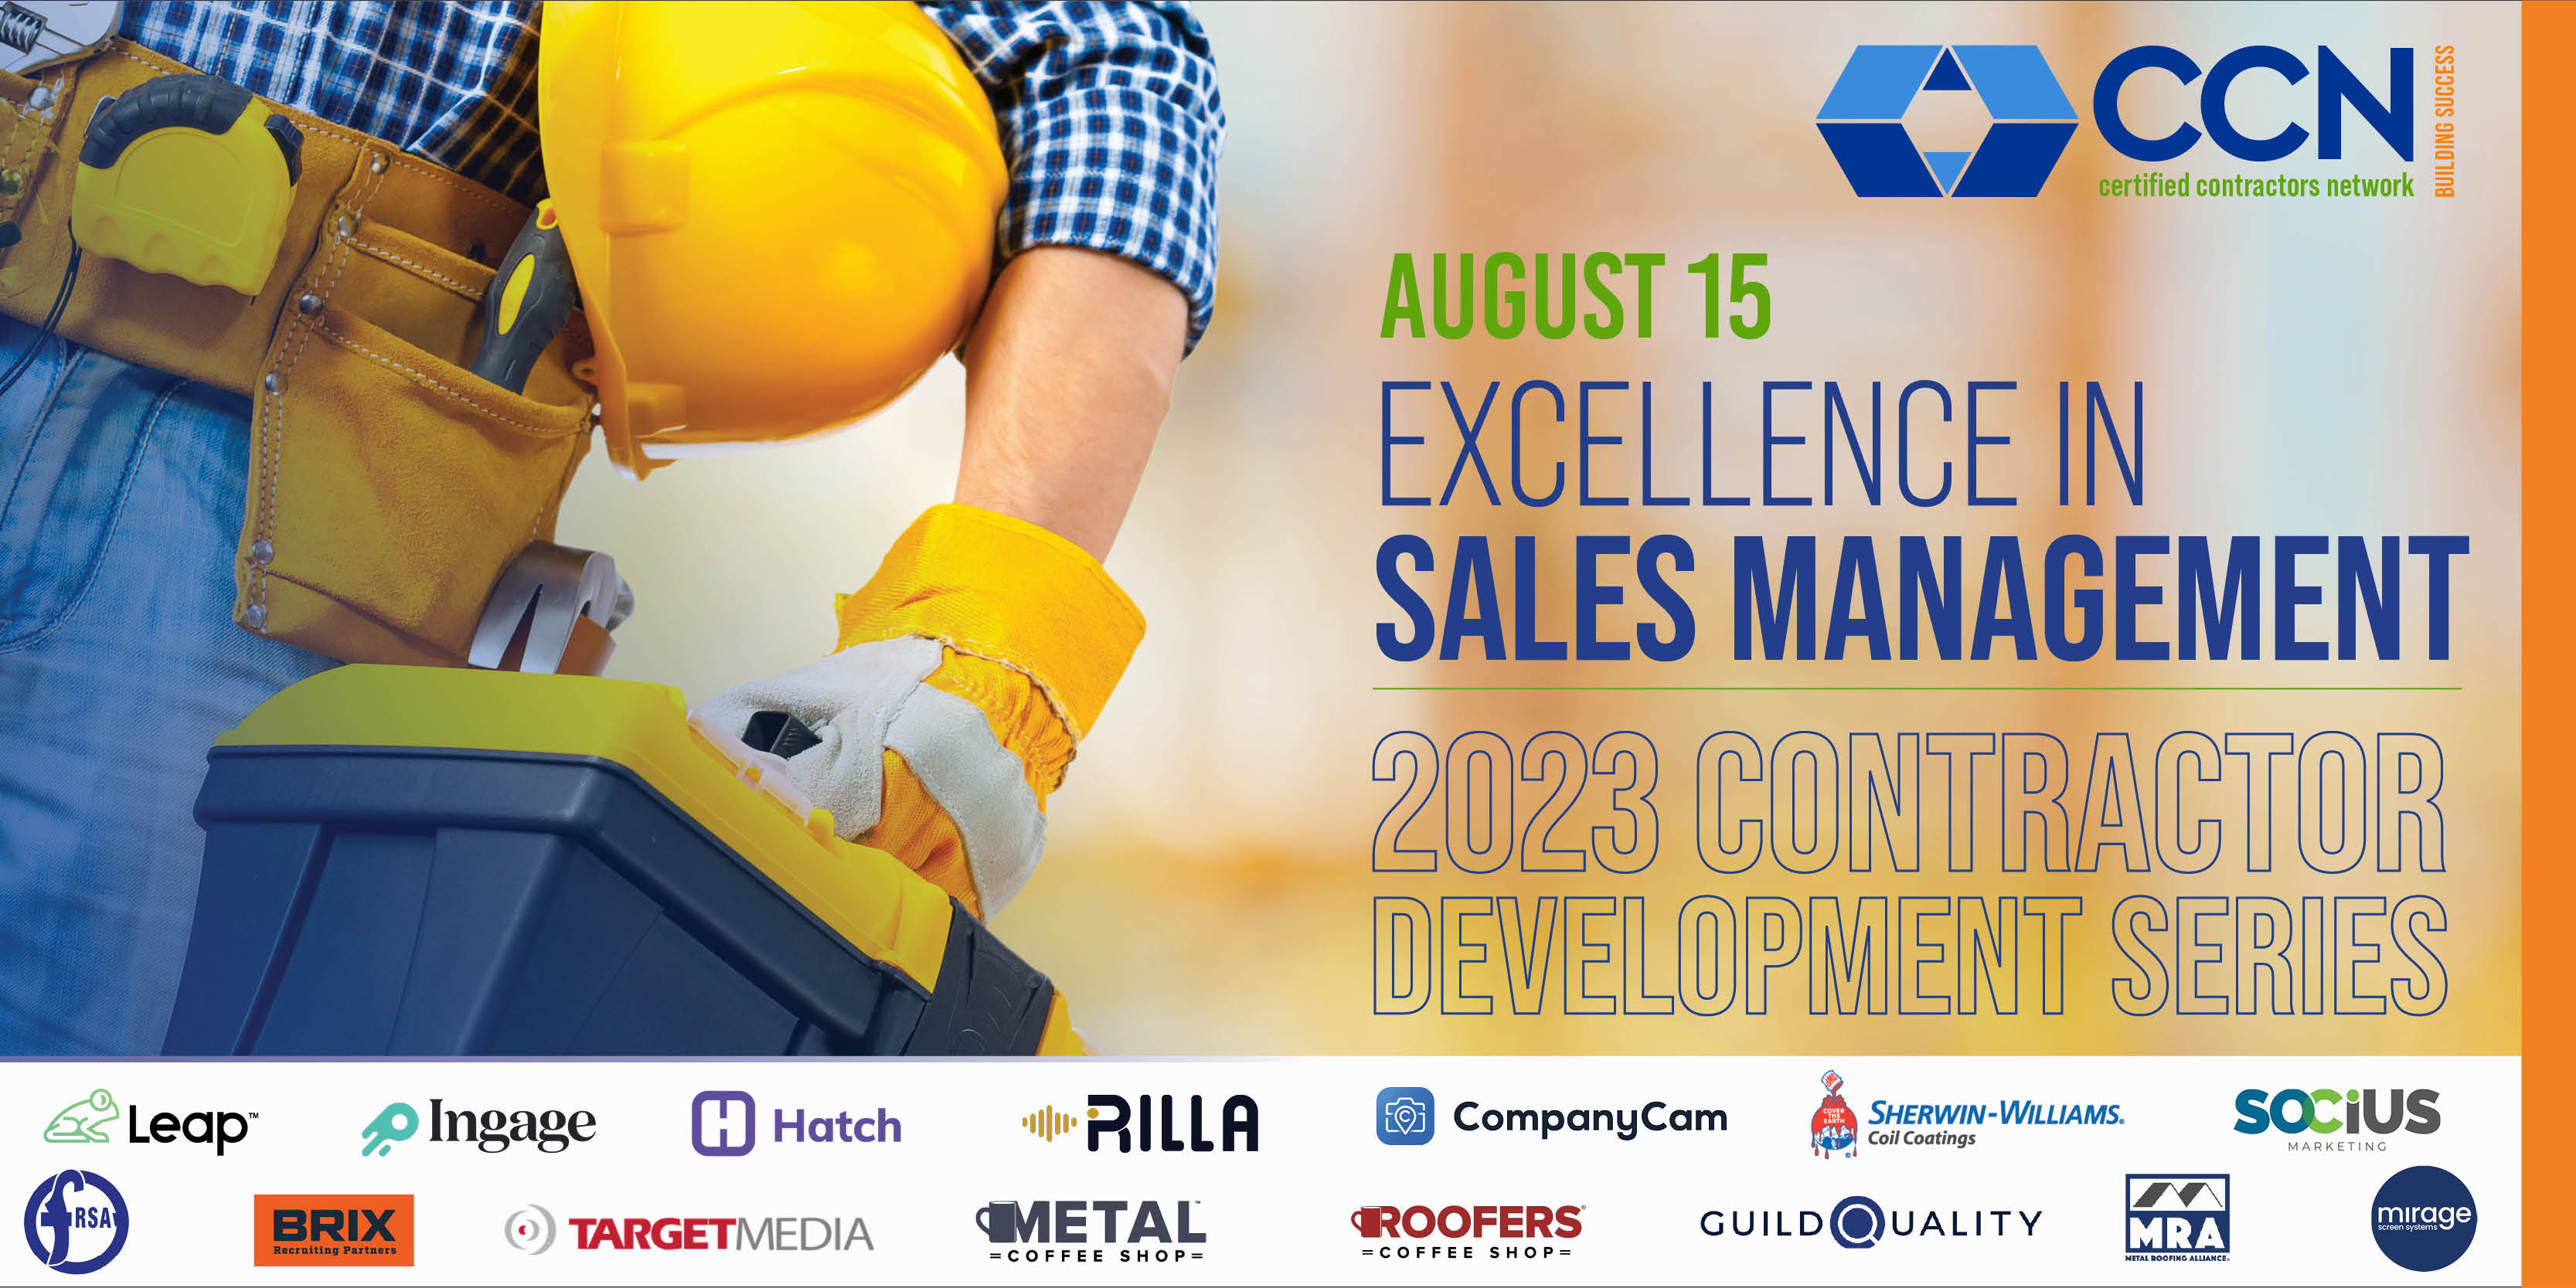 CCN - Excellence in Sales Management